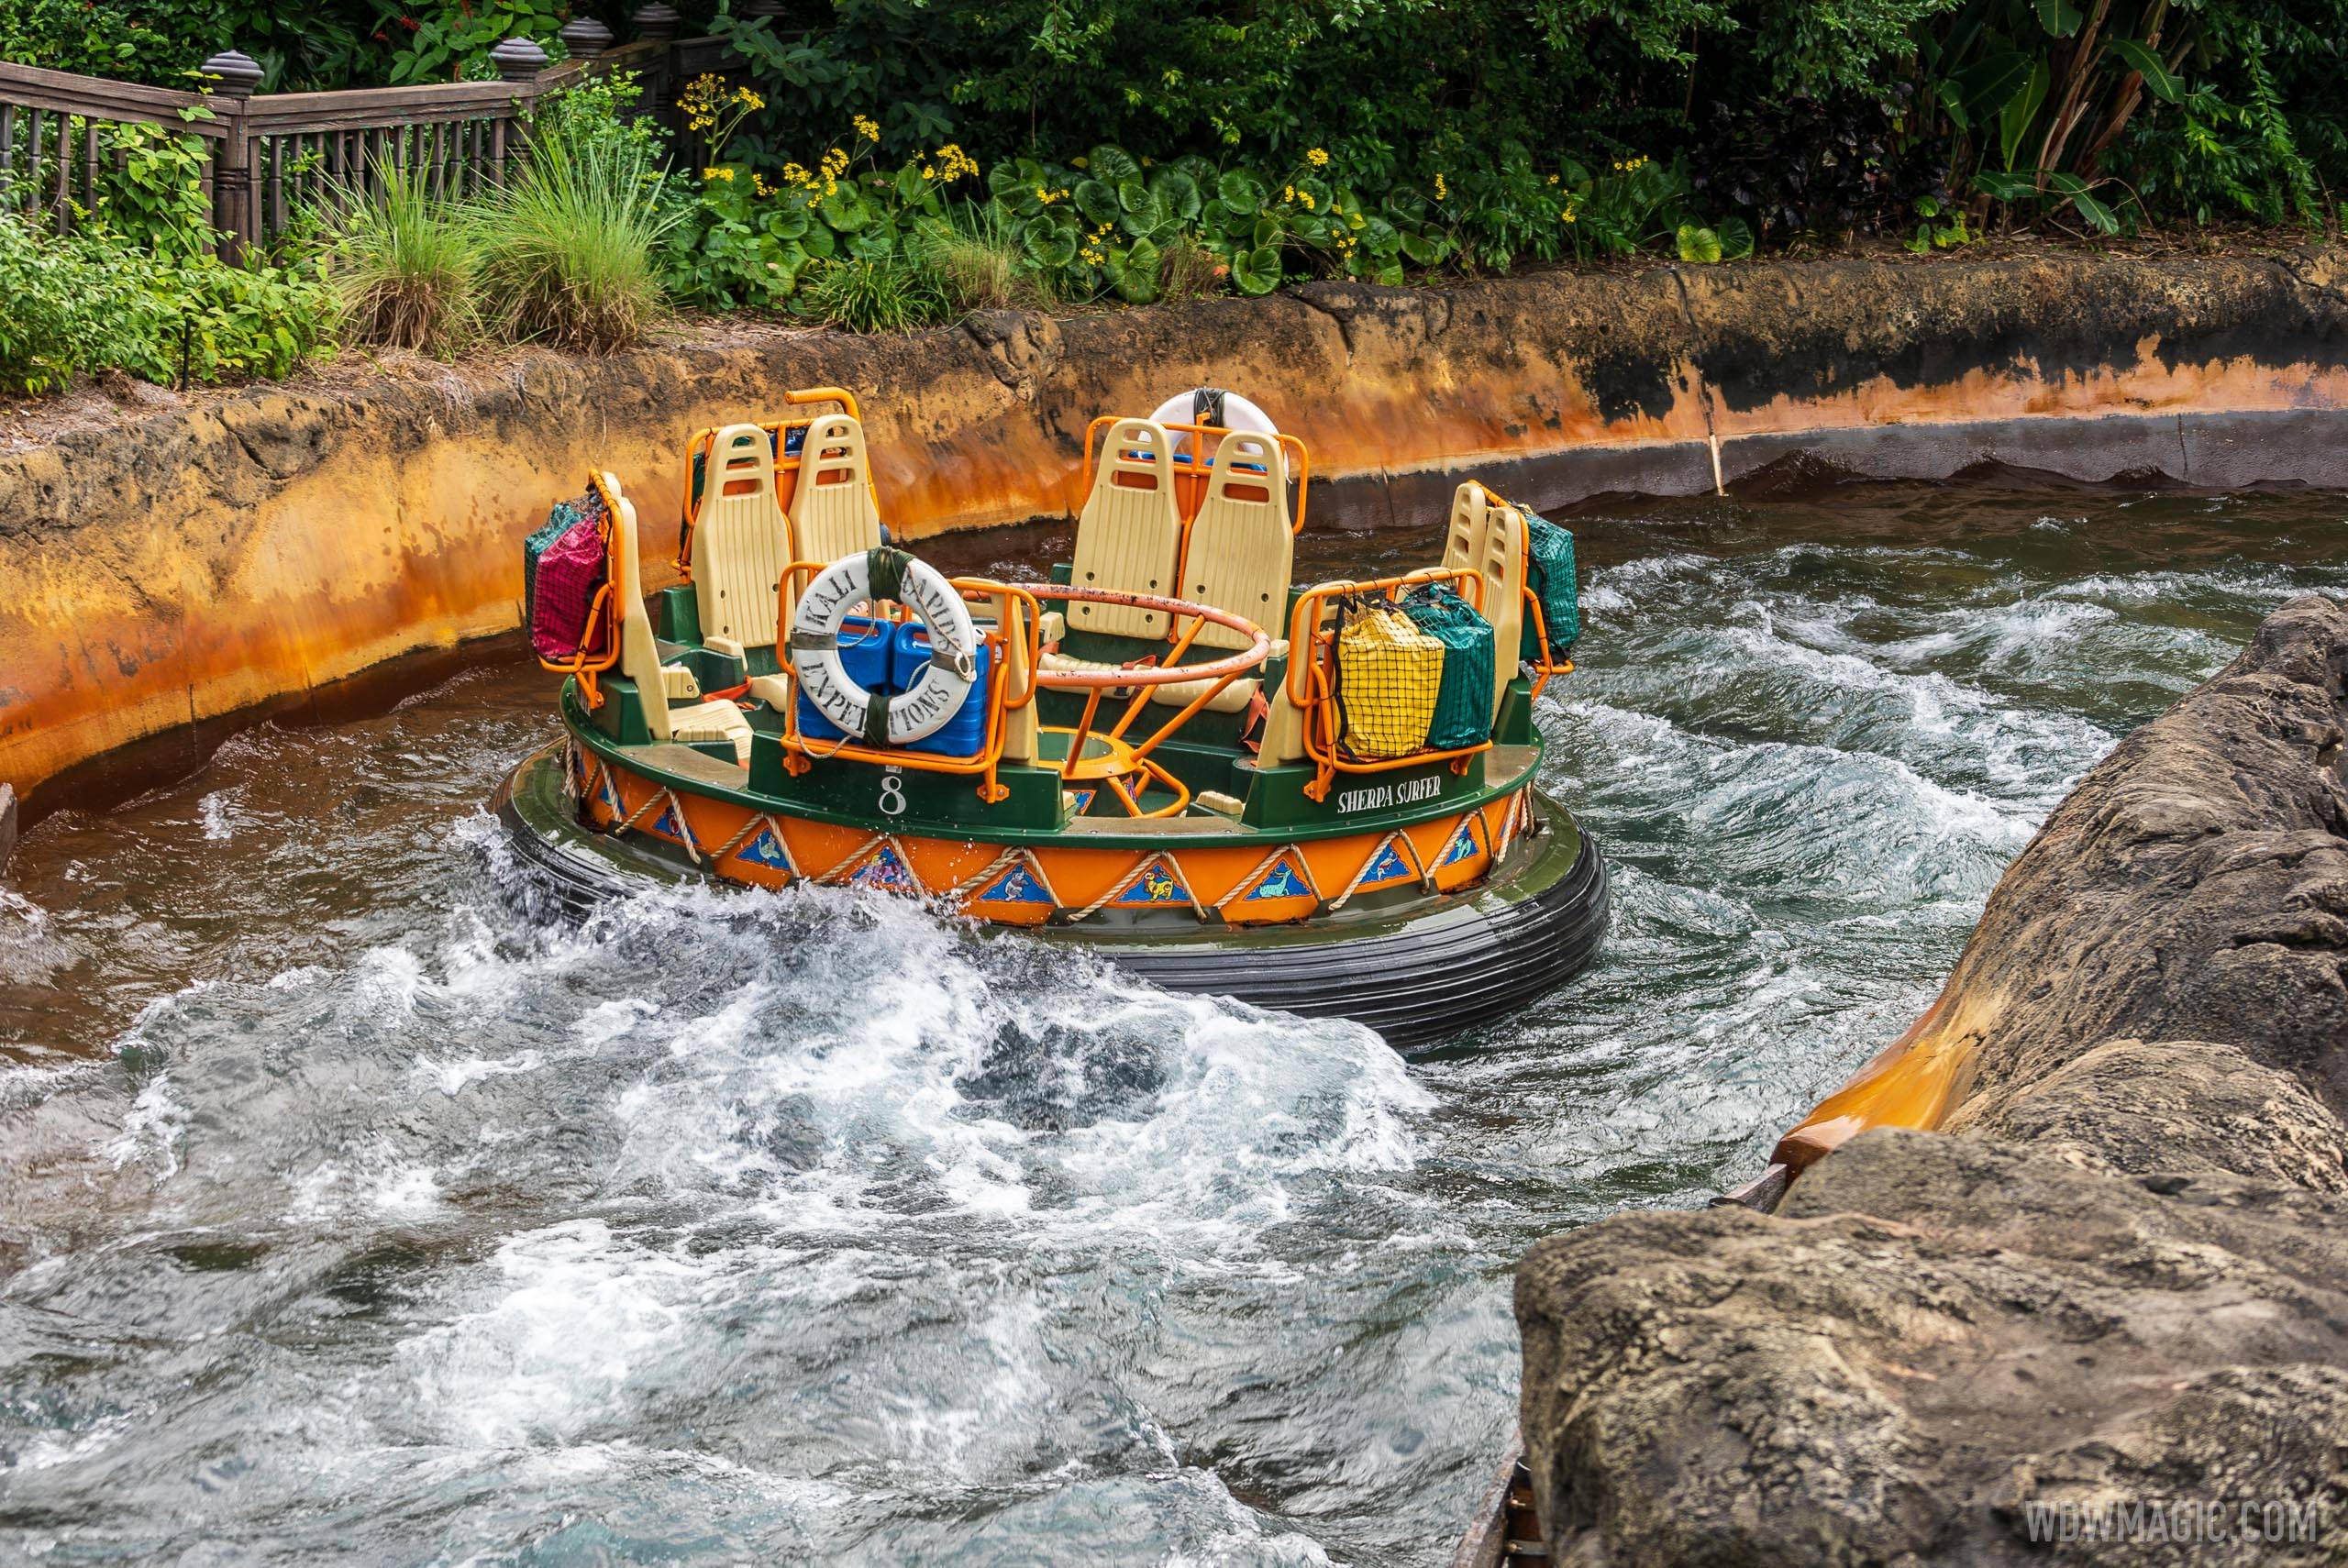 Kali River Rapids refurbishment planned for early 2020